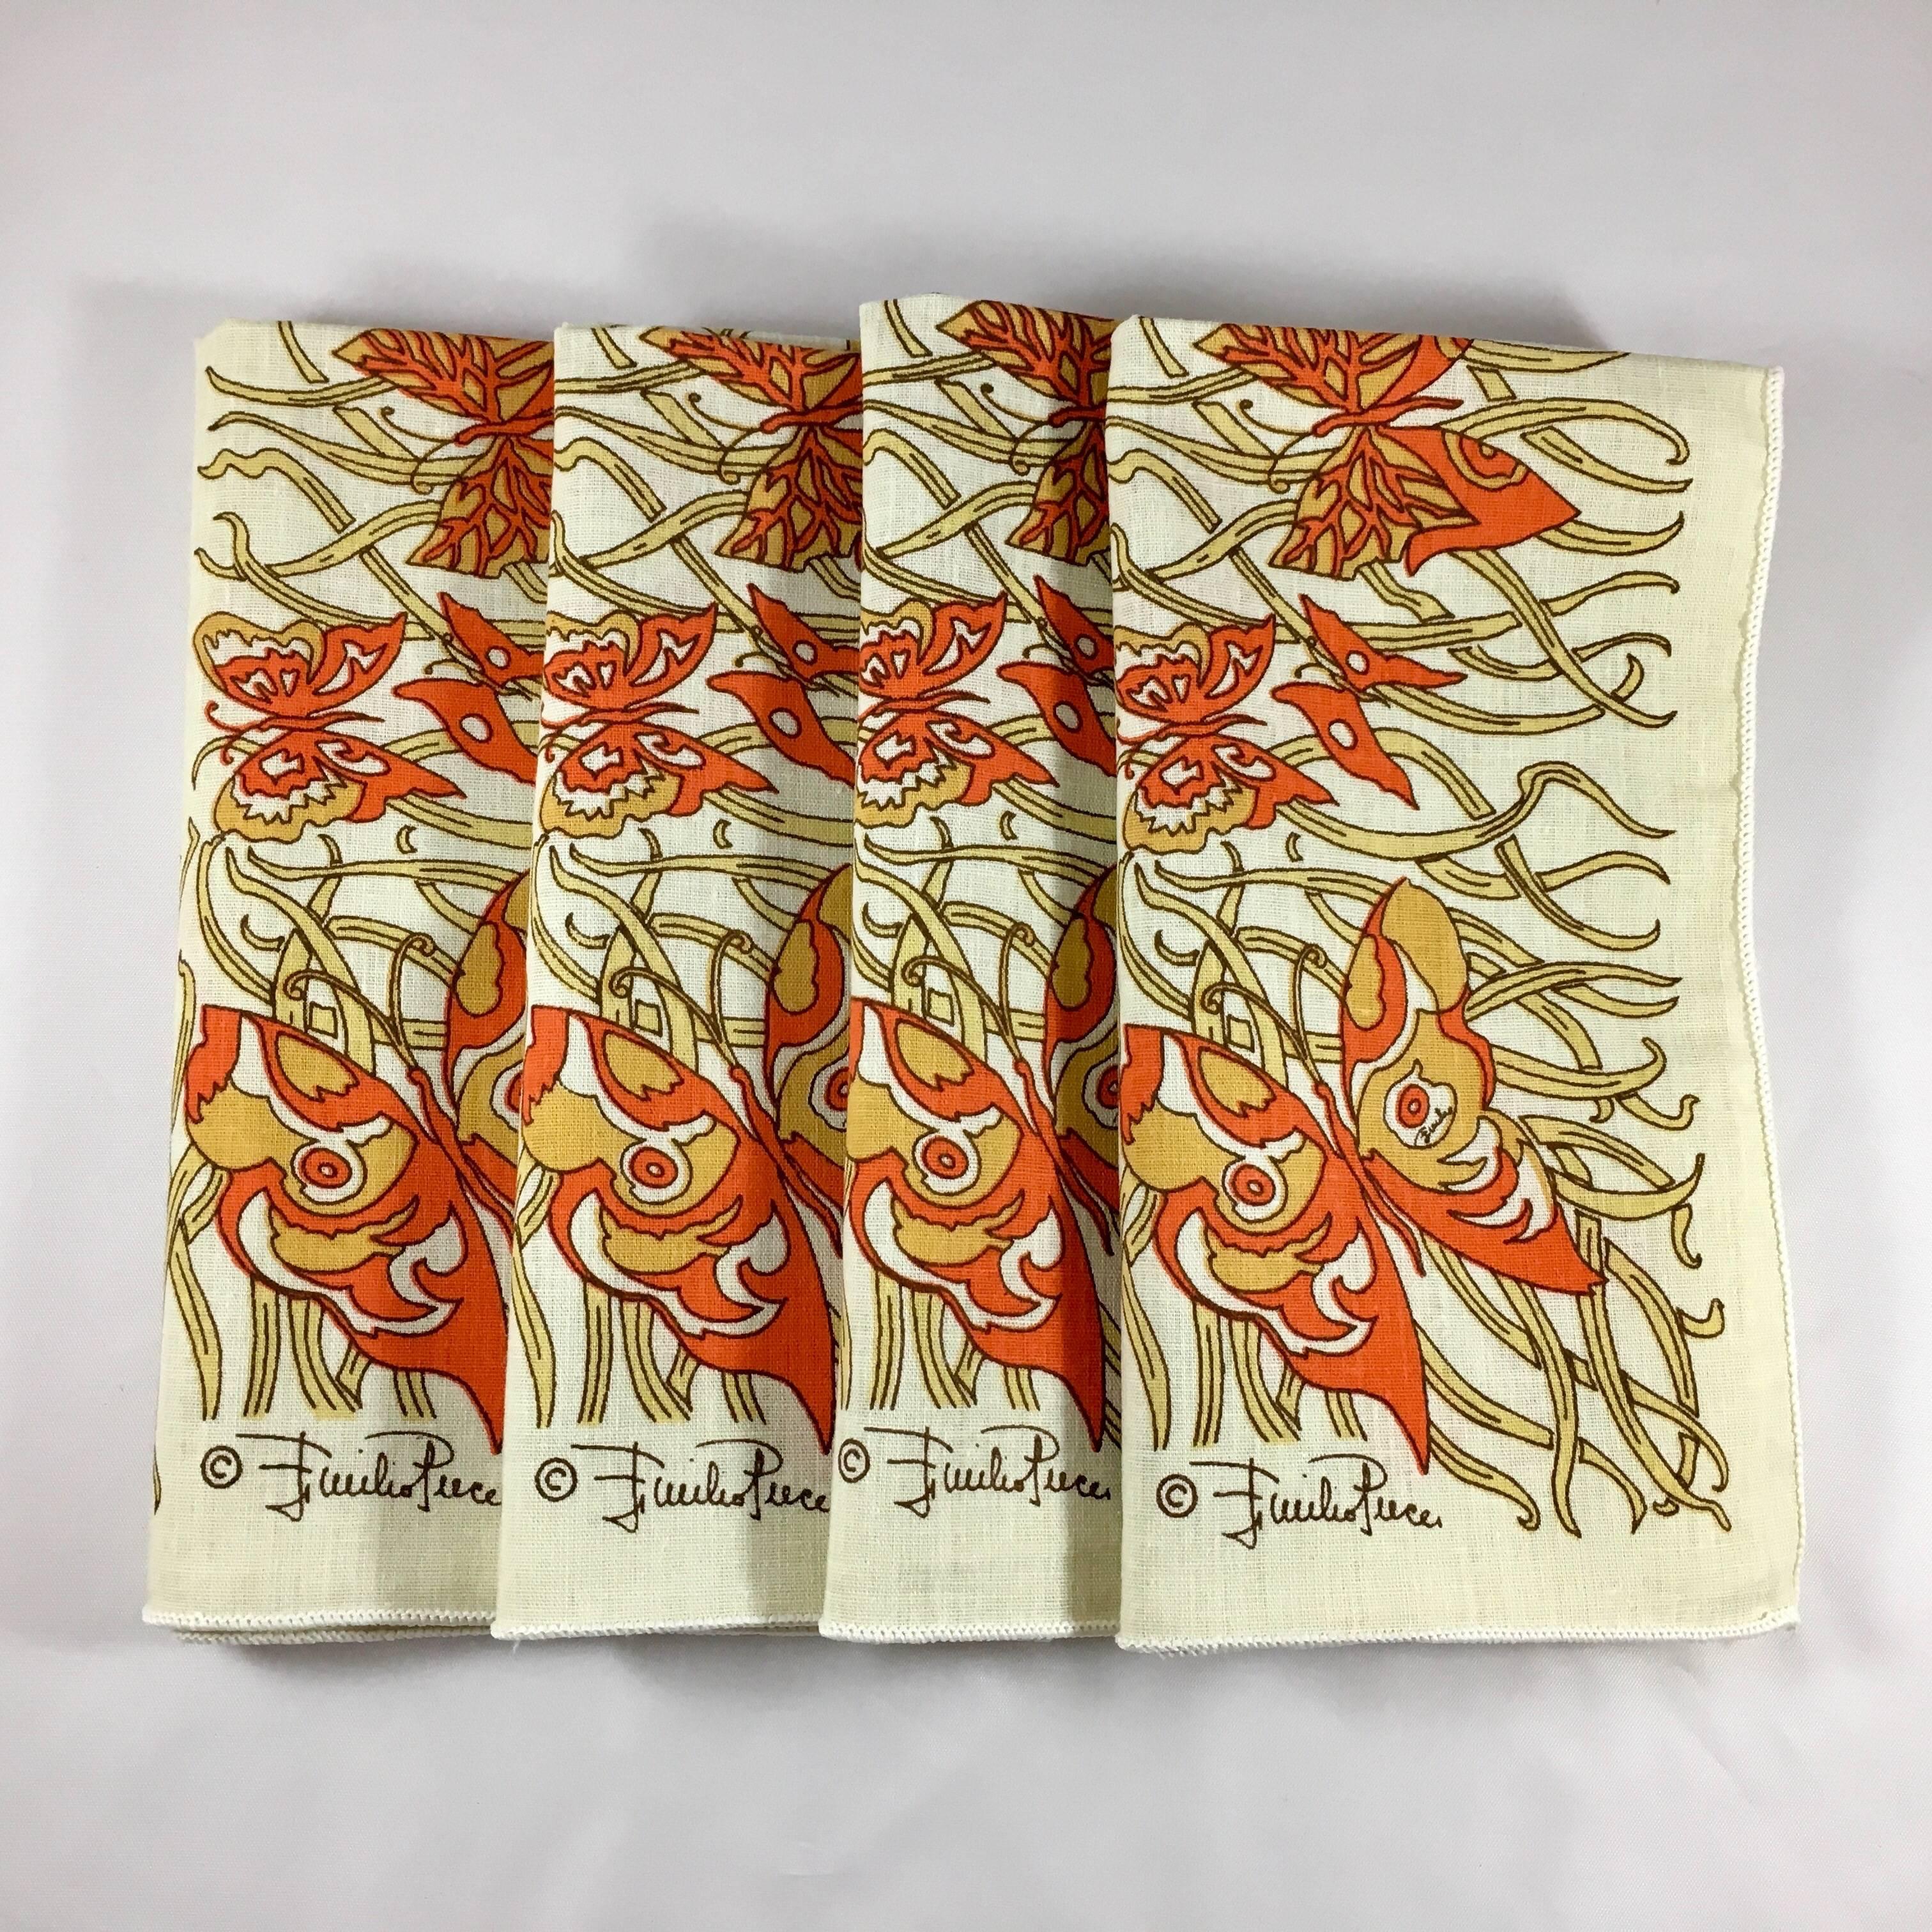 This is a set of four 1970s Emilio Pucci cotton blend napkins with a pattern featuring a beige background with yellow and orange butterflies frolicking through a grass border. They measure 16 3/4 inches x 16 1/2 inches and are in excellent